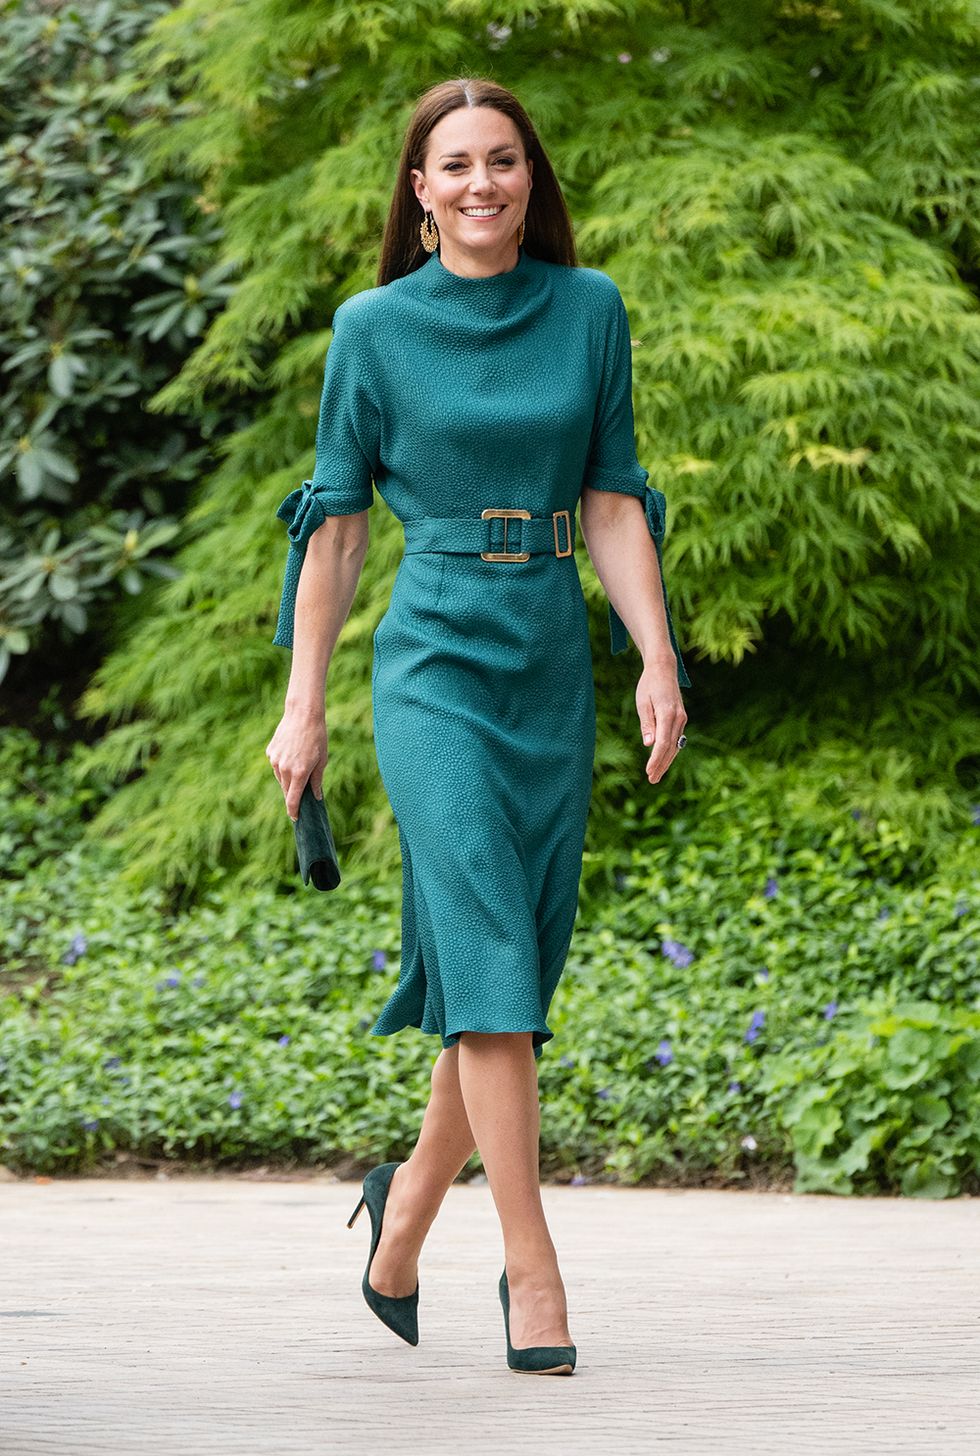 Kate Middleton makes a statement in stunning green belted dress at The ...